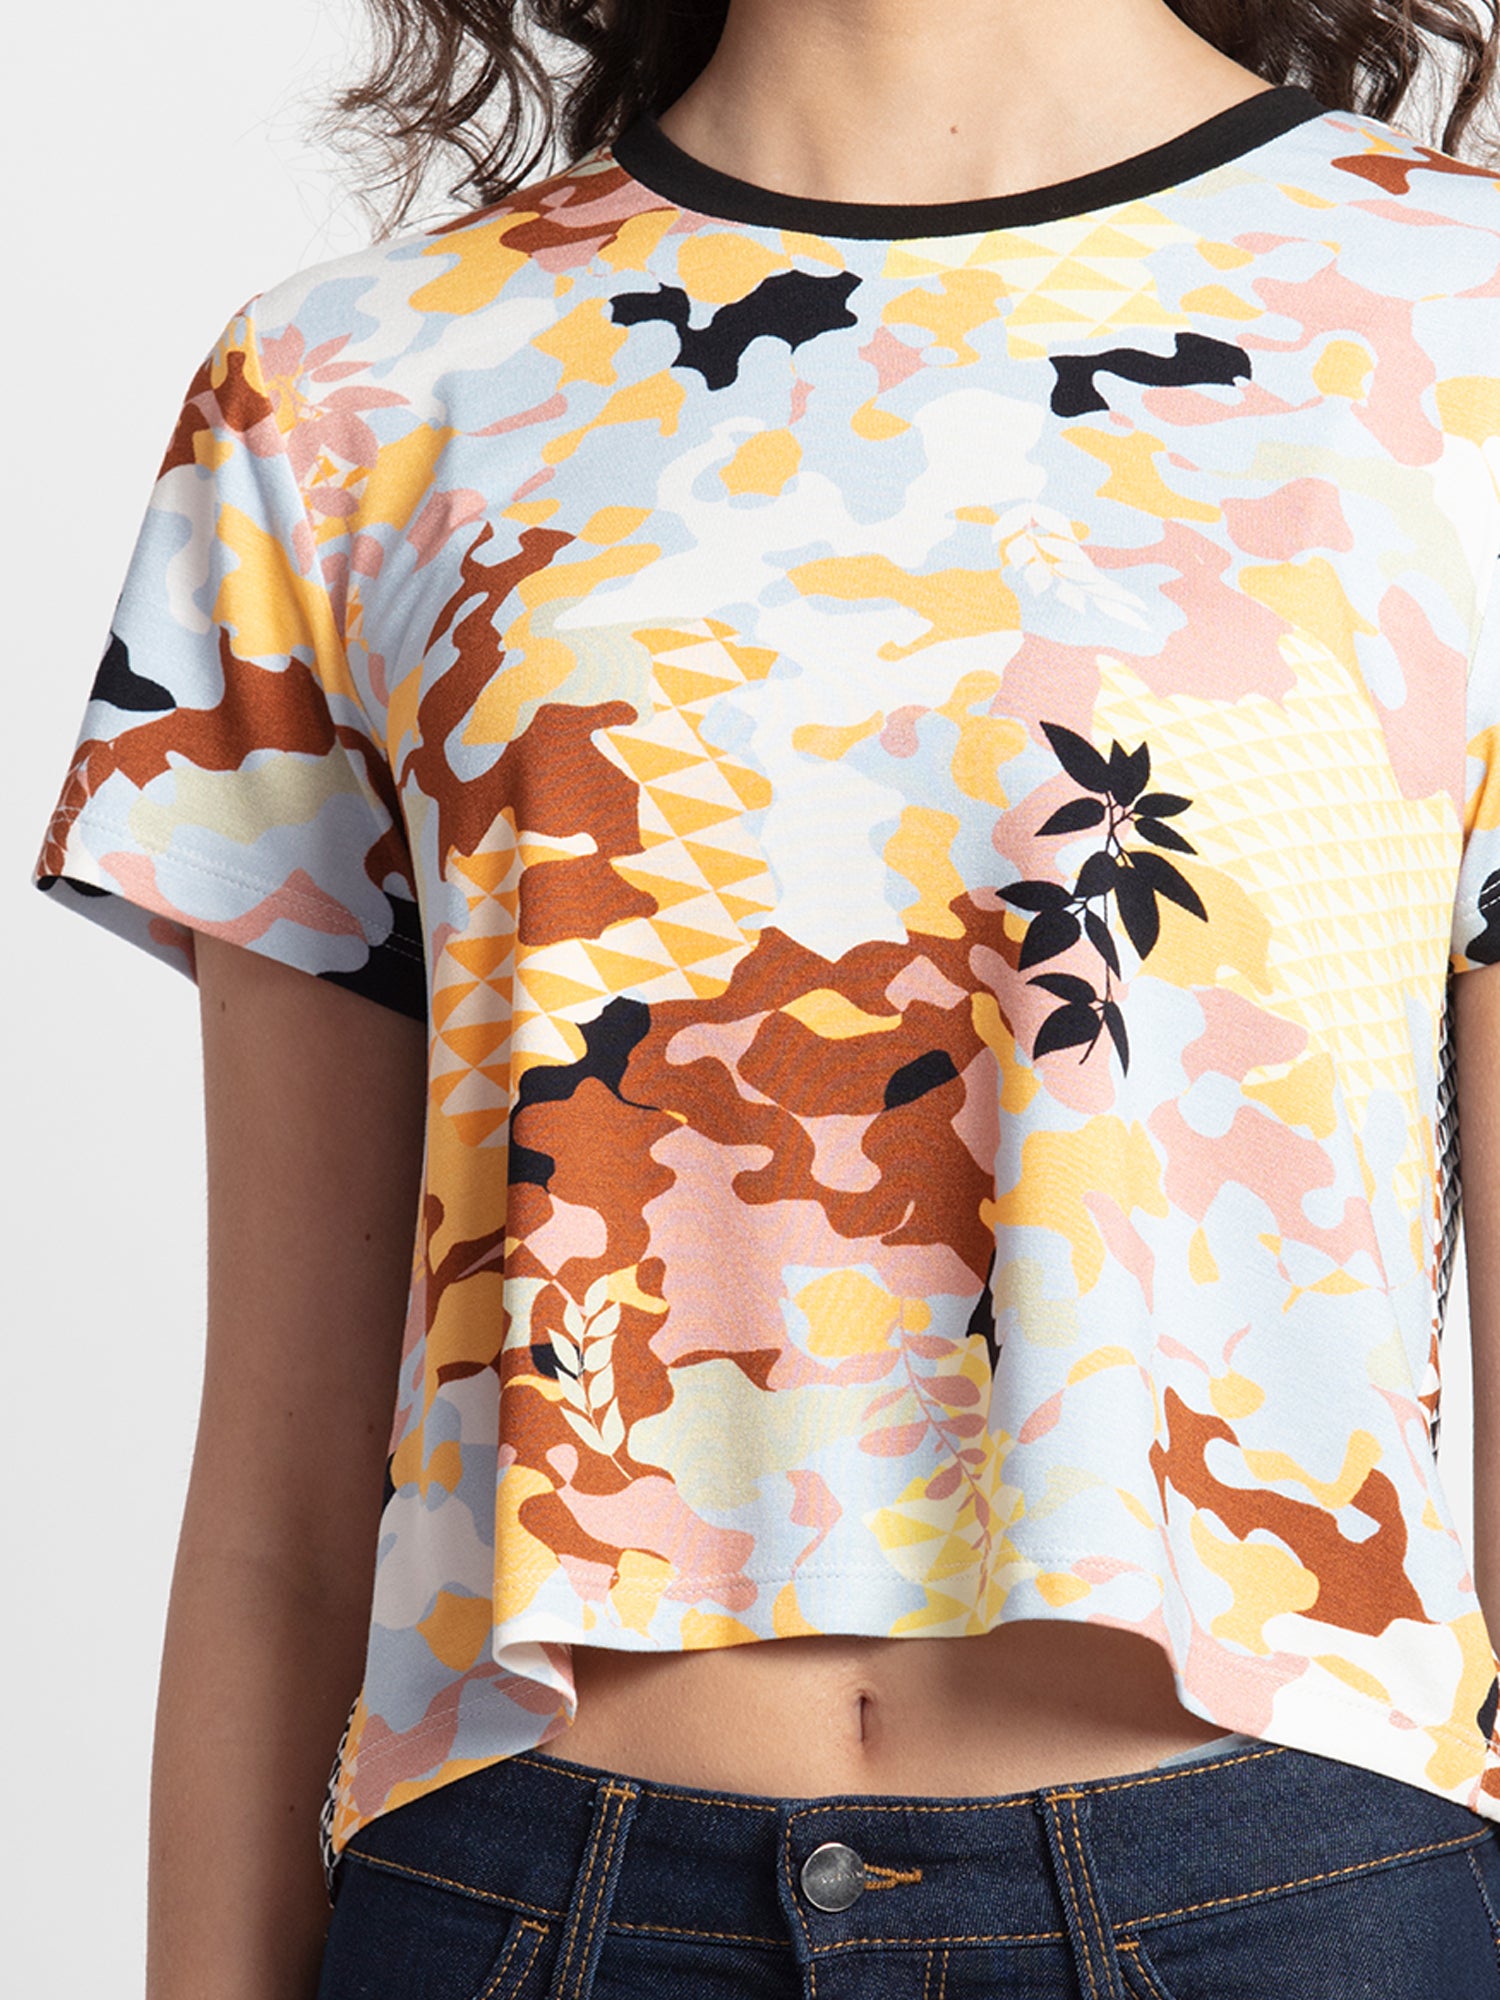 Ellie Camo Tee from Shaye , for women